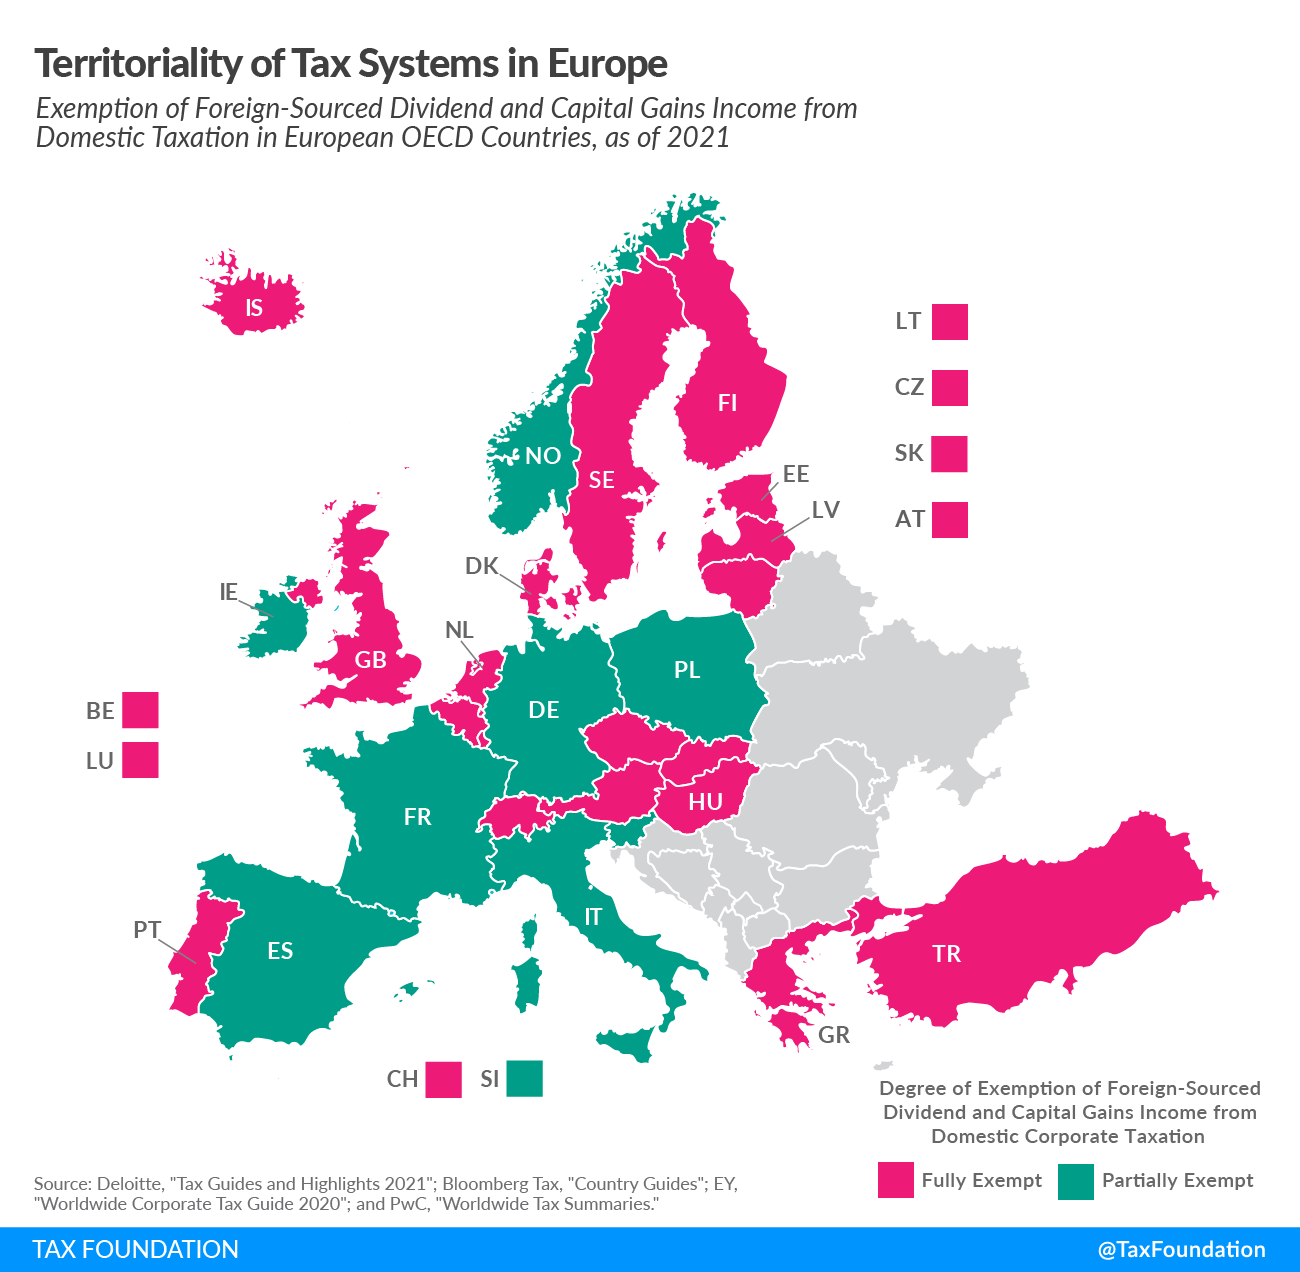 Territorial tax systems in Europe 2021 exemption of foreign-sourced dividend and capital gains income from domestic taxation in Europe